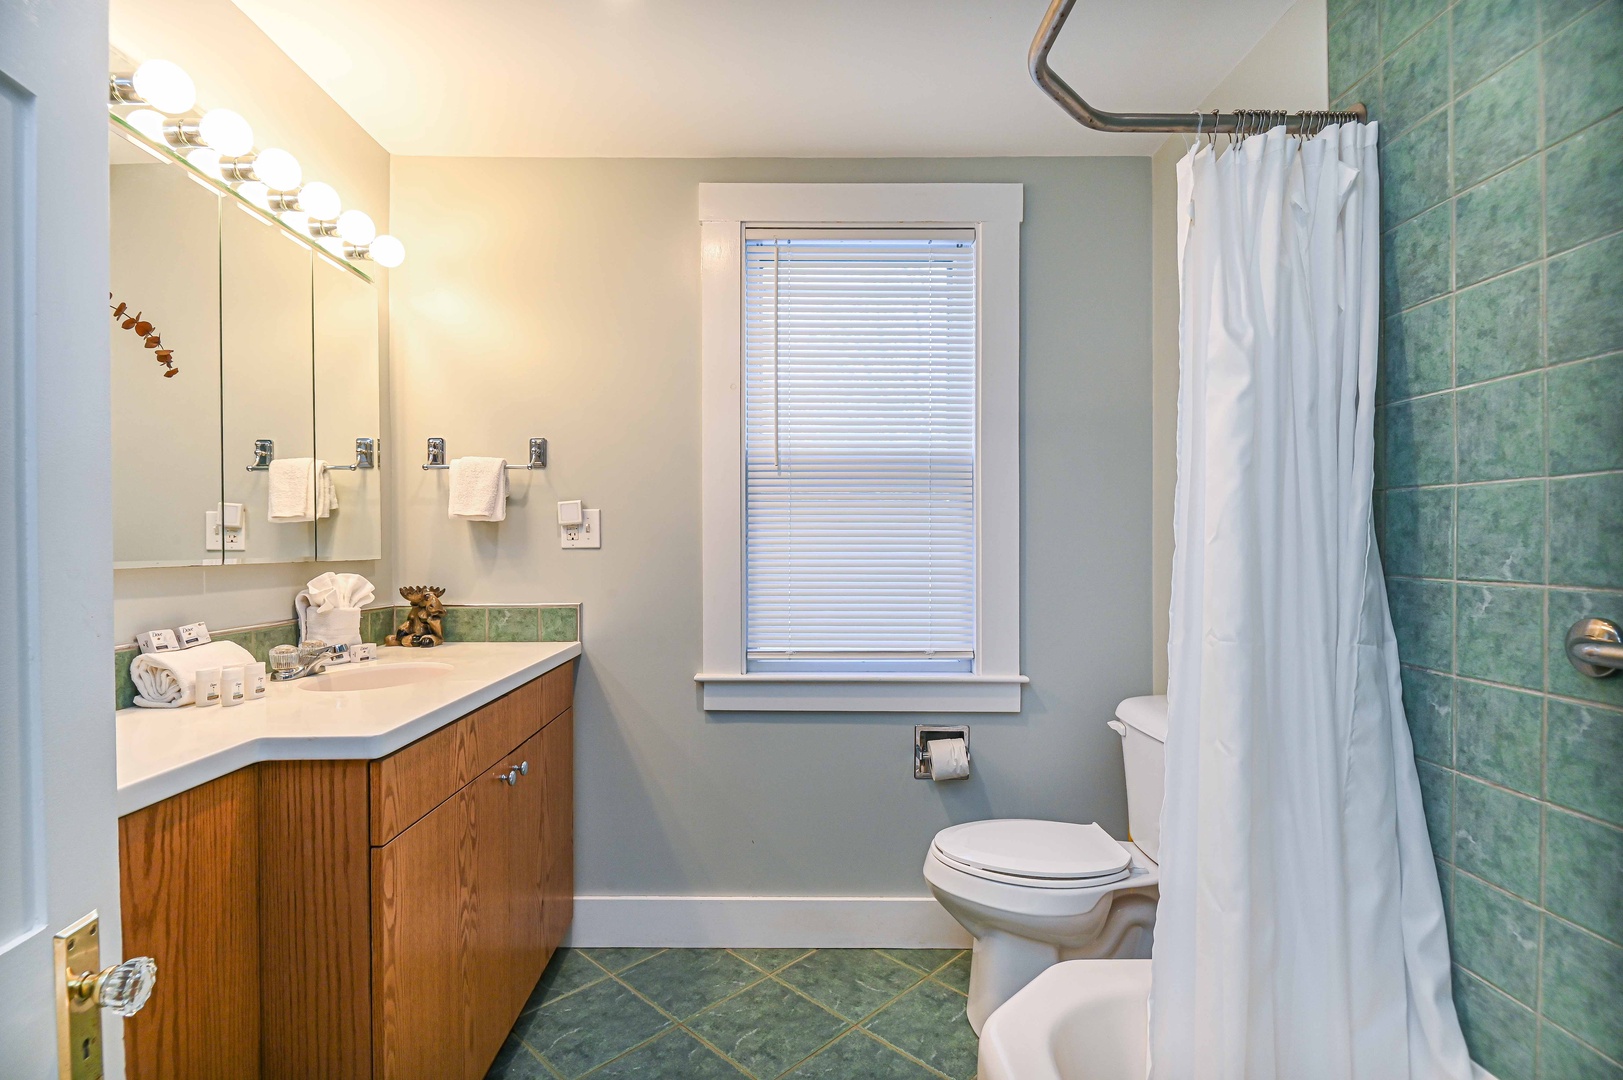 The full bath on the first floor includes a single vanity & shower/tub combo